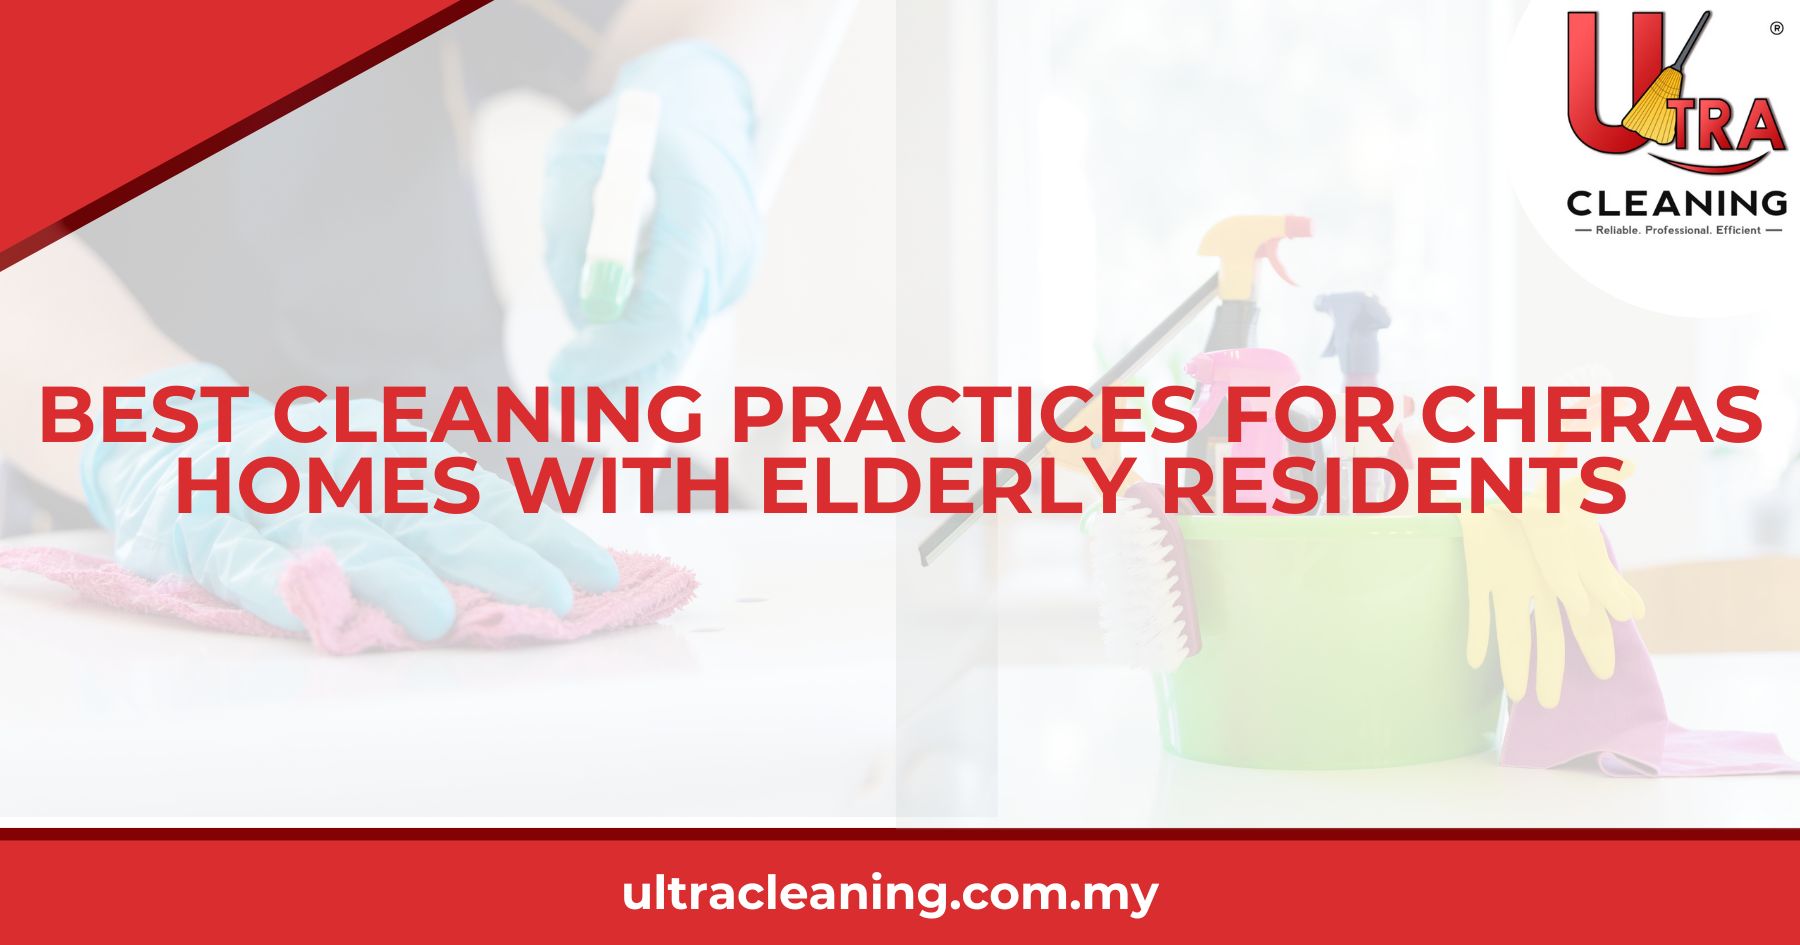 Best Cleaning Practices for Cheras Homes with Elderly Residents